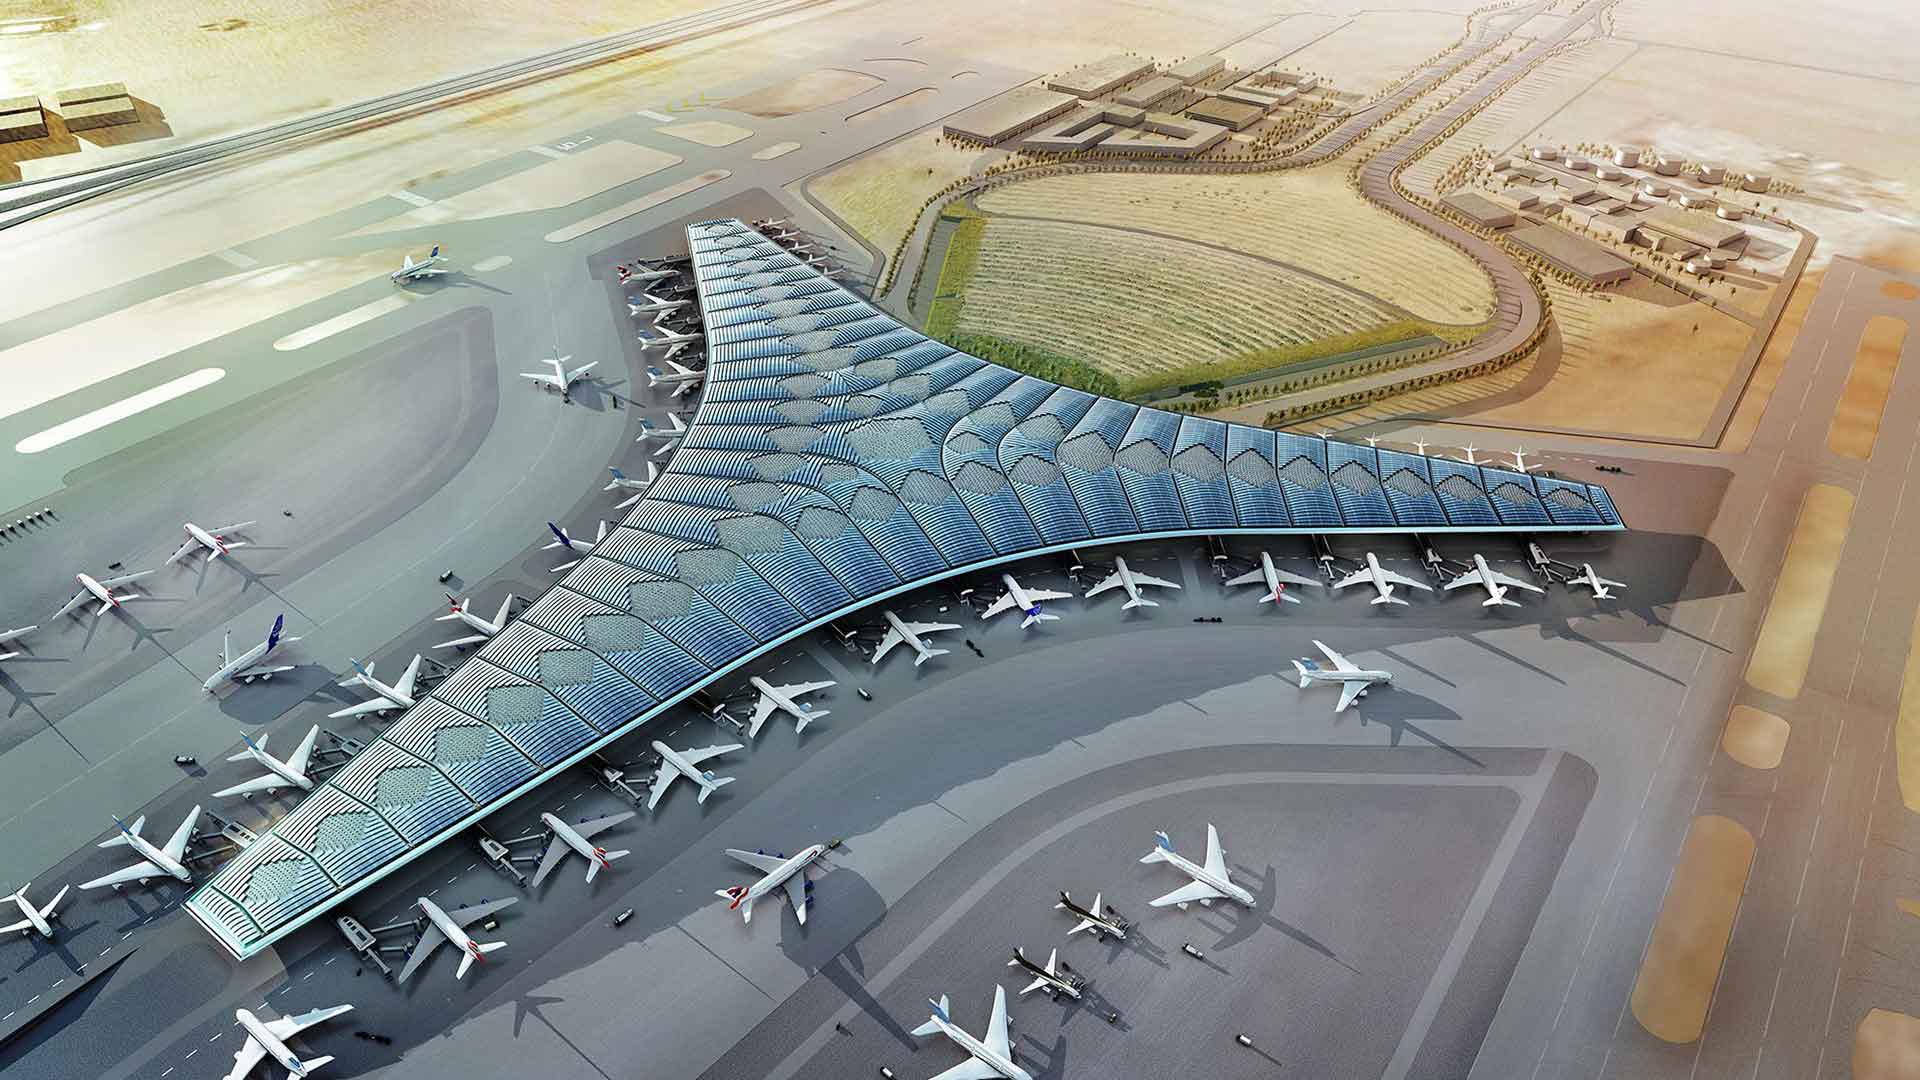 Kuwait International Airport is an airport located in Farwaniya, Kuwait, 15.5 km (9.6 miles) south of Kuwait City, covering an area of 37.7 square kilometers (14.6 square miles). It is the hub of Al Jazeera and Kuwait airlines.